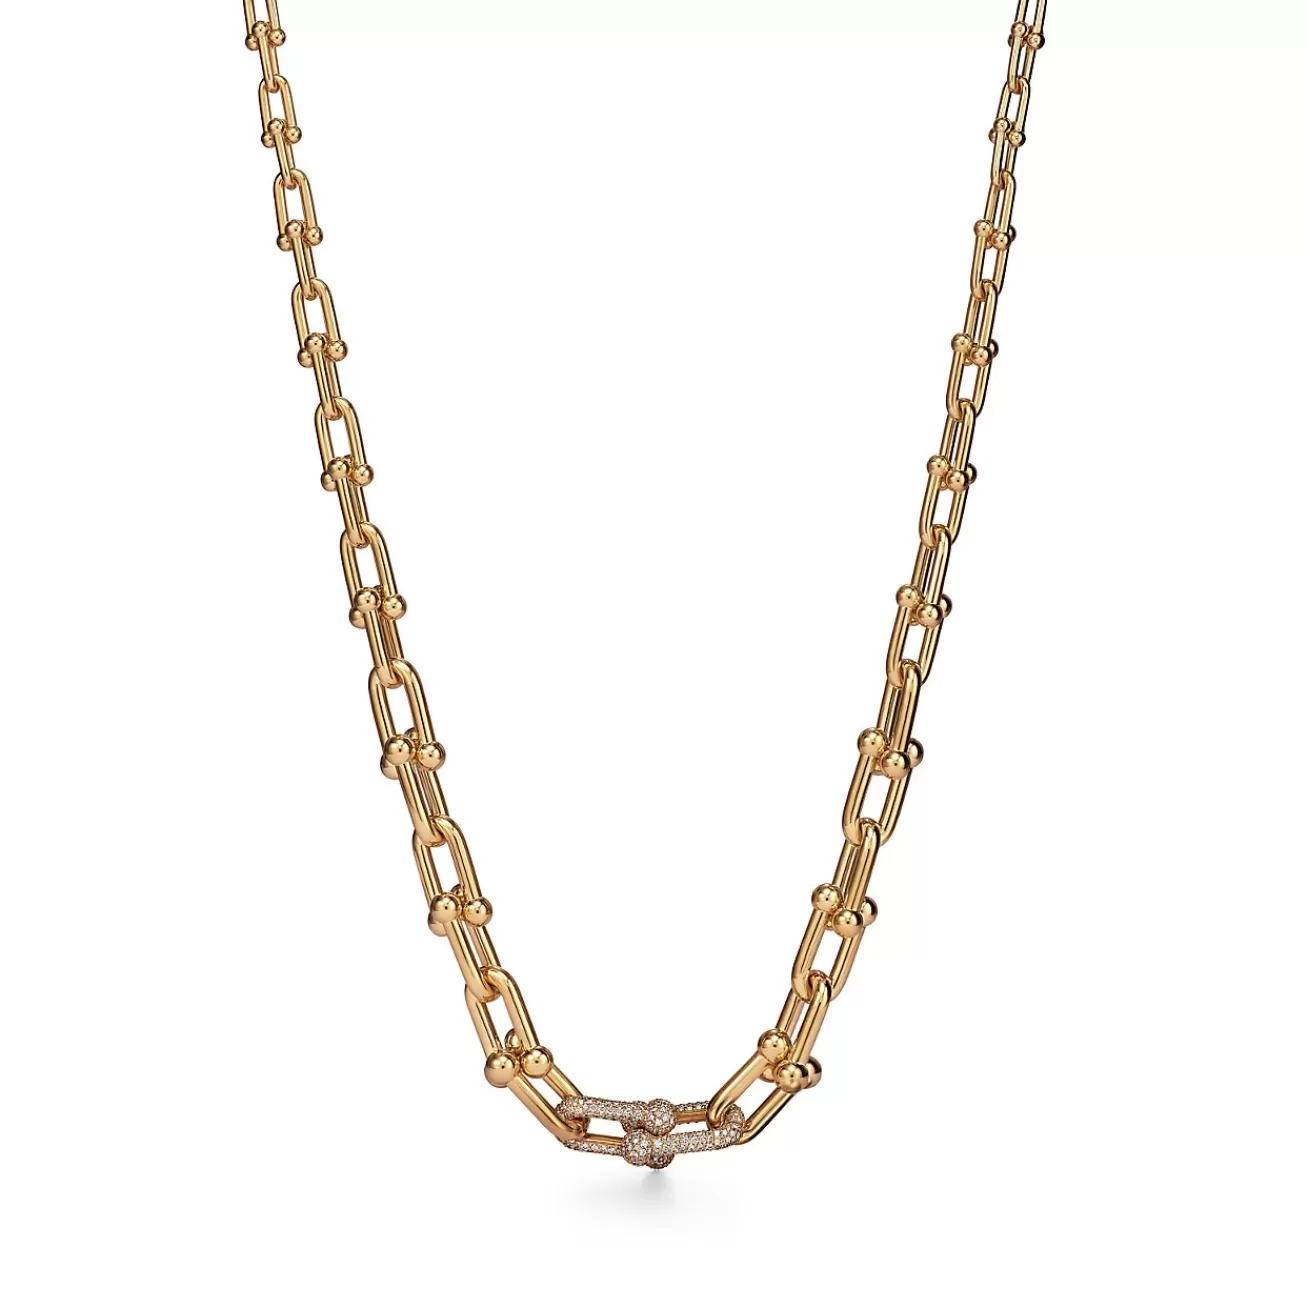 Tiffany & Co. Tiffany HardWear Graduated Link Necklace in Yellow Gold with Pavé Diamonds | ^ Necklaces & Pendants | Men's Jewelry